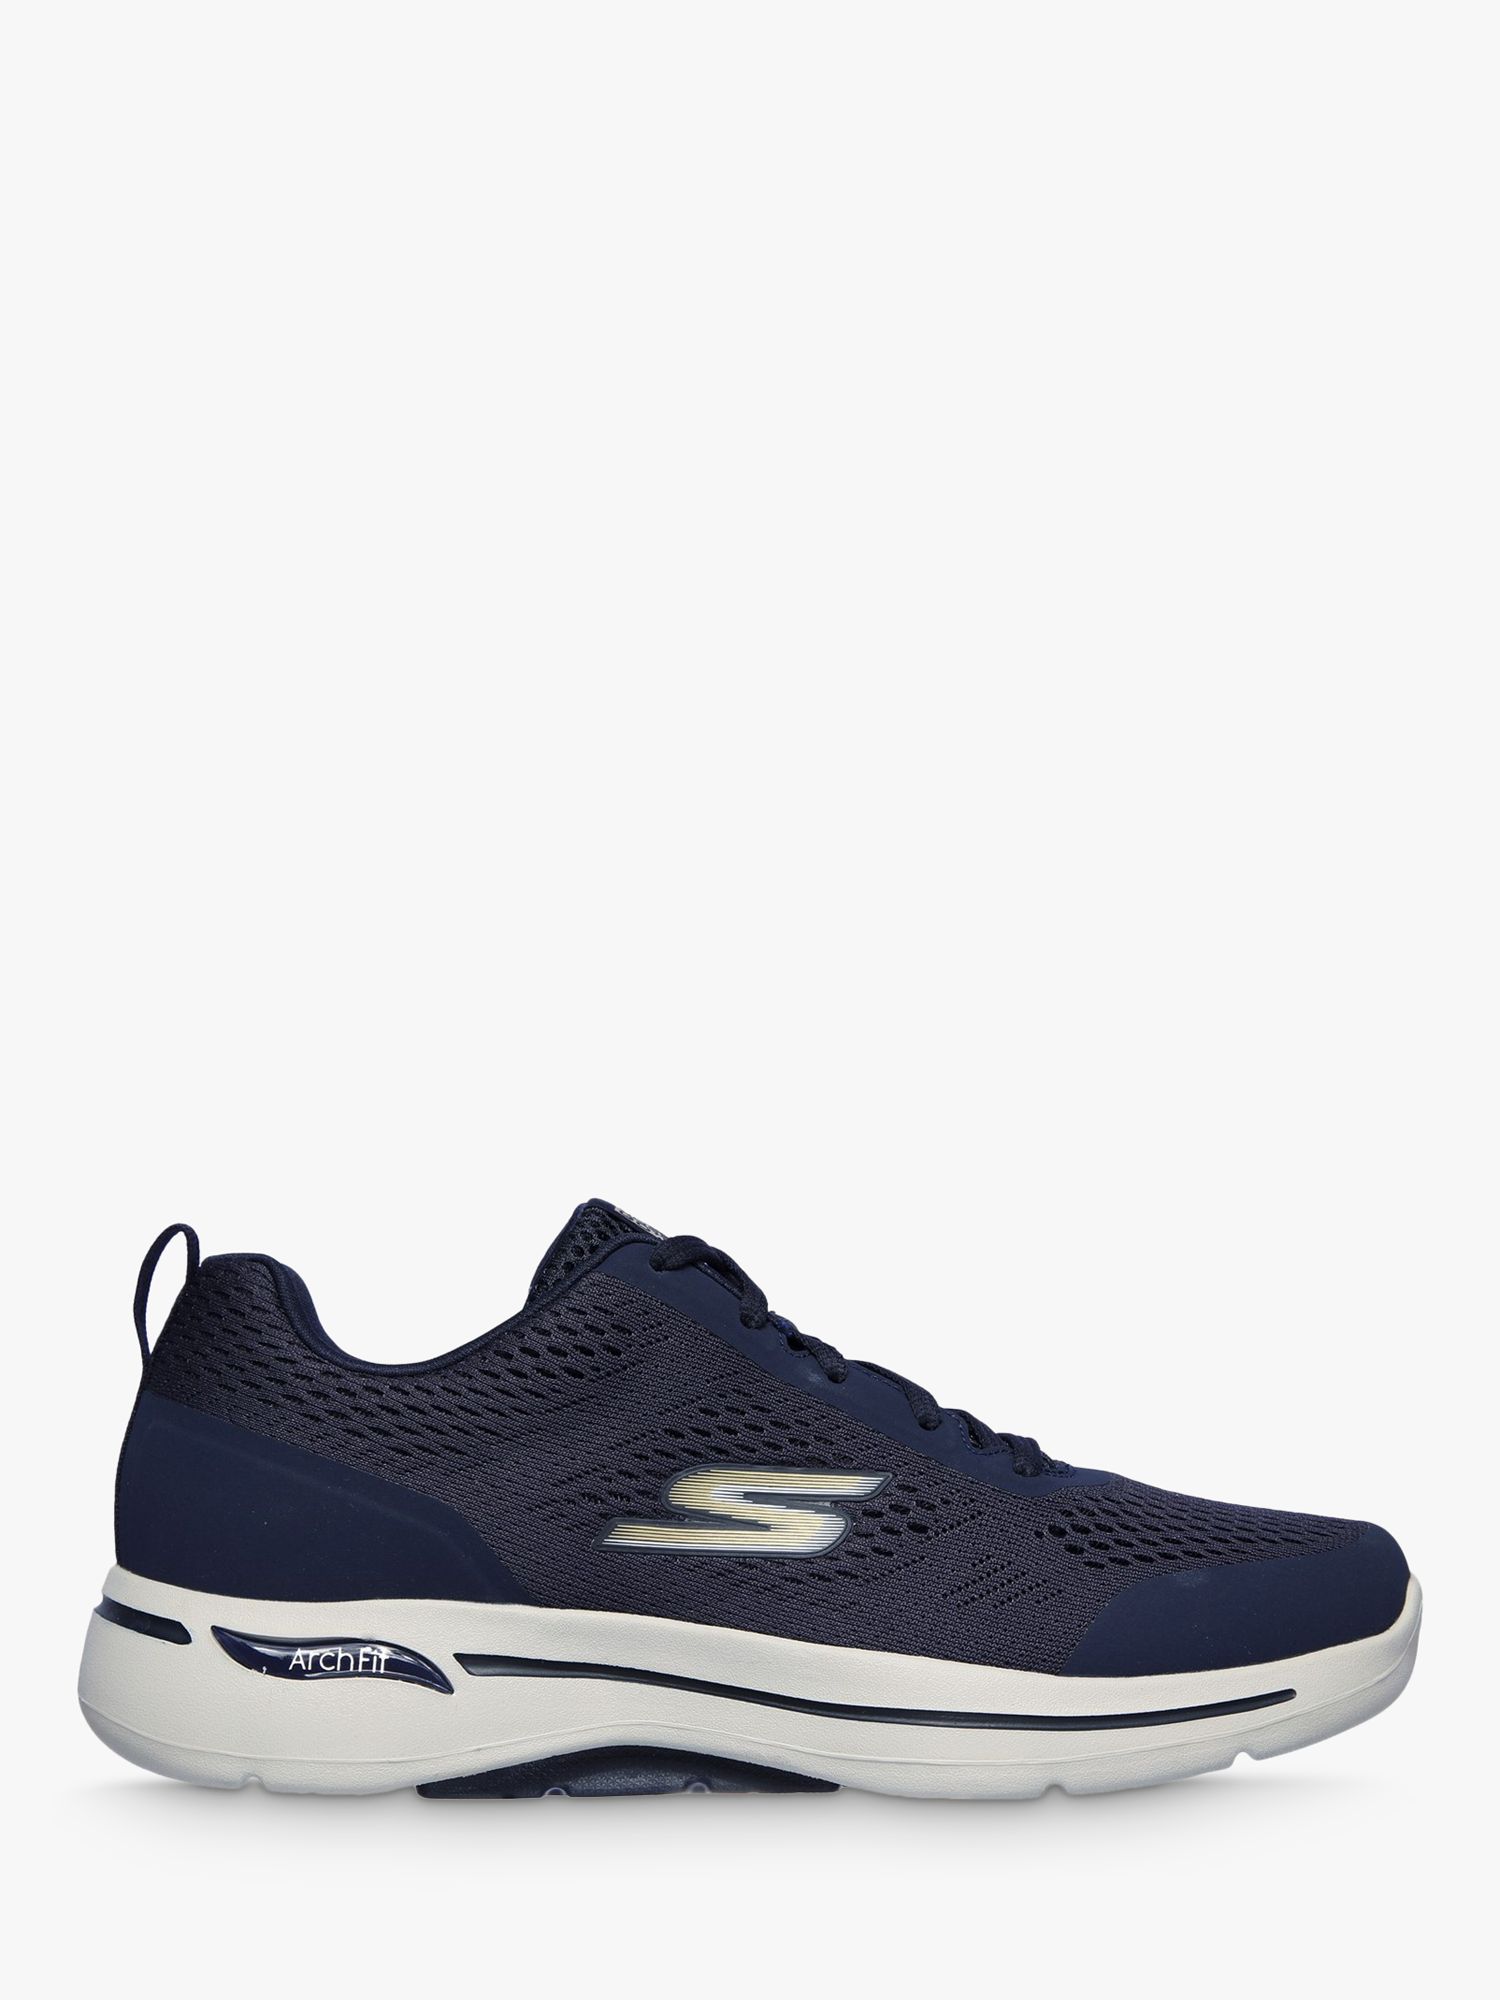 Skechers Walk Arch Fit Trainers, at Lewis & Partners